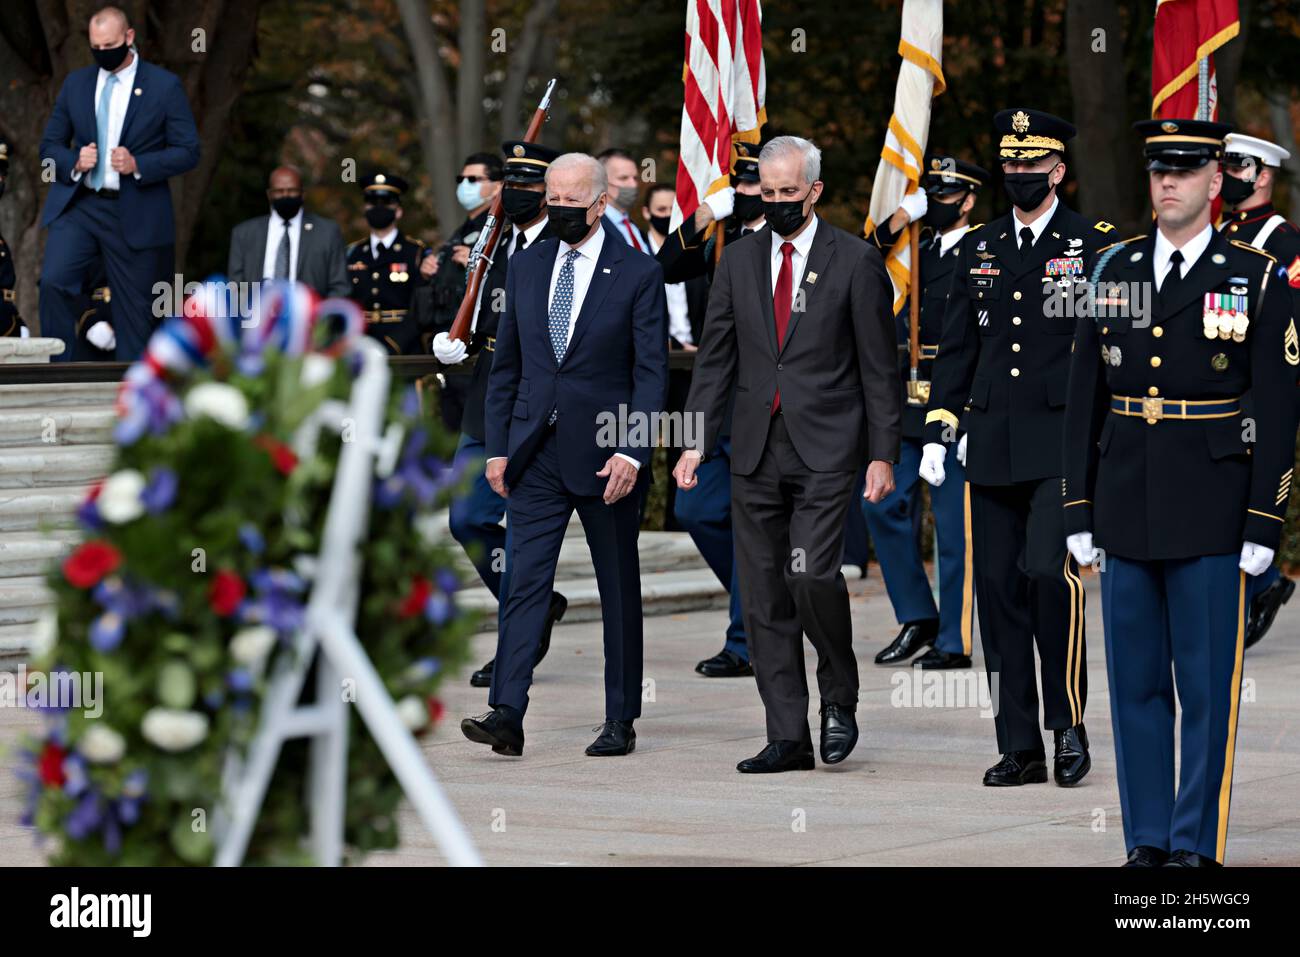 Arlington, USA. 11th Nov, 2021. United States President Joe Biden, left, and US Secretary of Veterans Affairs Denis McDonough, center, participate in a Presidential Armed Forces Full Honor Wreath-Laying Ceremony on the 100th anniversary of the Tomb of the Unknown Soldier at Arlington National Cemetery in Arlington, Virginia, U.S., on Thursday, Nov. 11, 2021. 2021 marks the centennial anniversary of the Tomb of the Unknown Soldier, providing a final resting place for one of America's unidentified World War I service members, and Unknowns from later wars were added in 1958 and 1984. Credit: Oliv Stock Photo